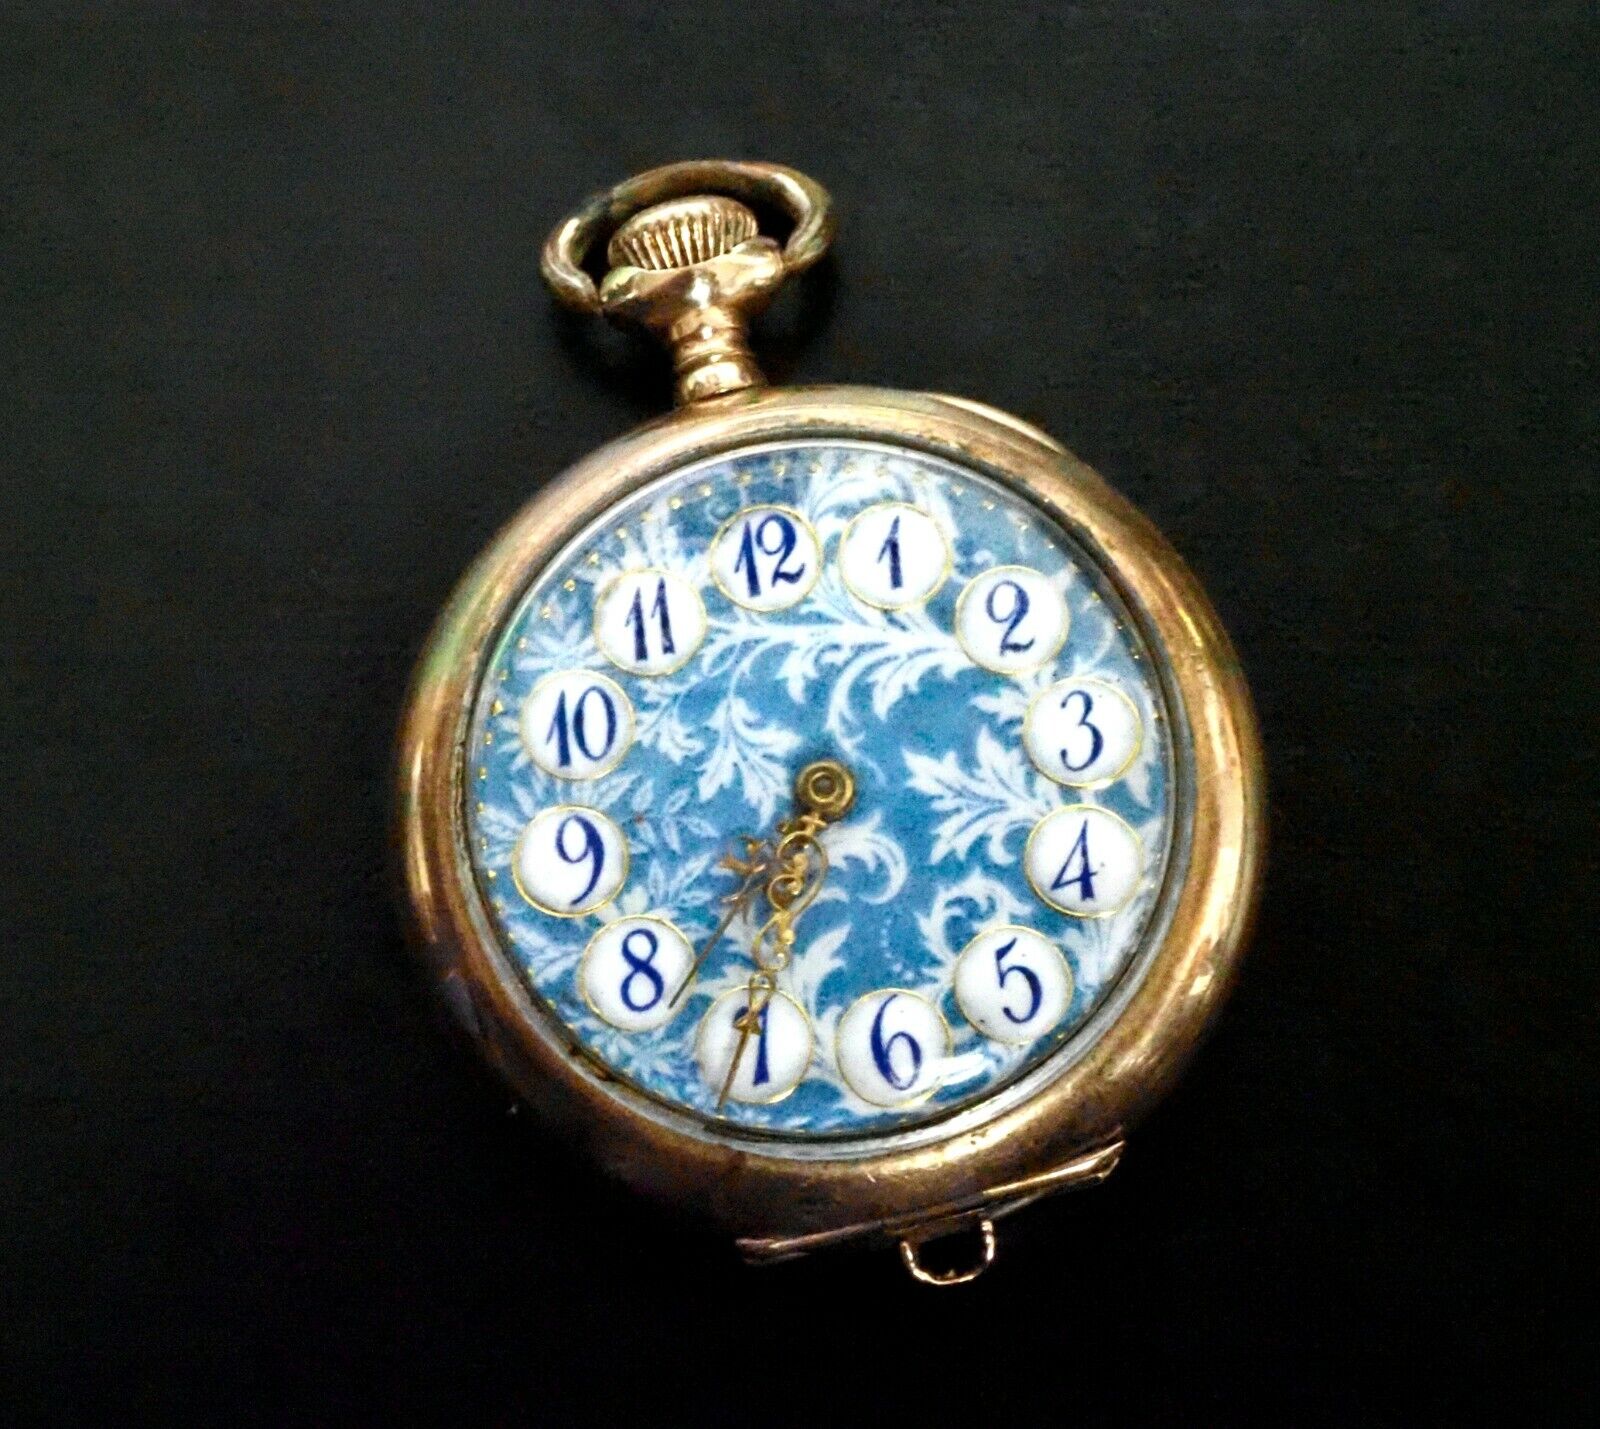 B&B royal case United States Watch Co pocket watch Floral Dial